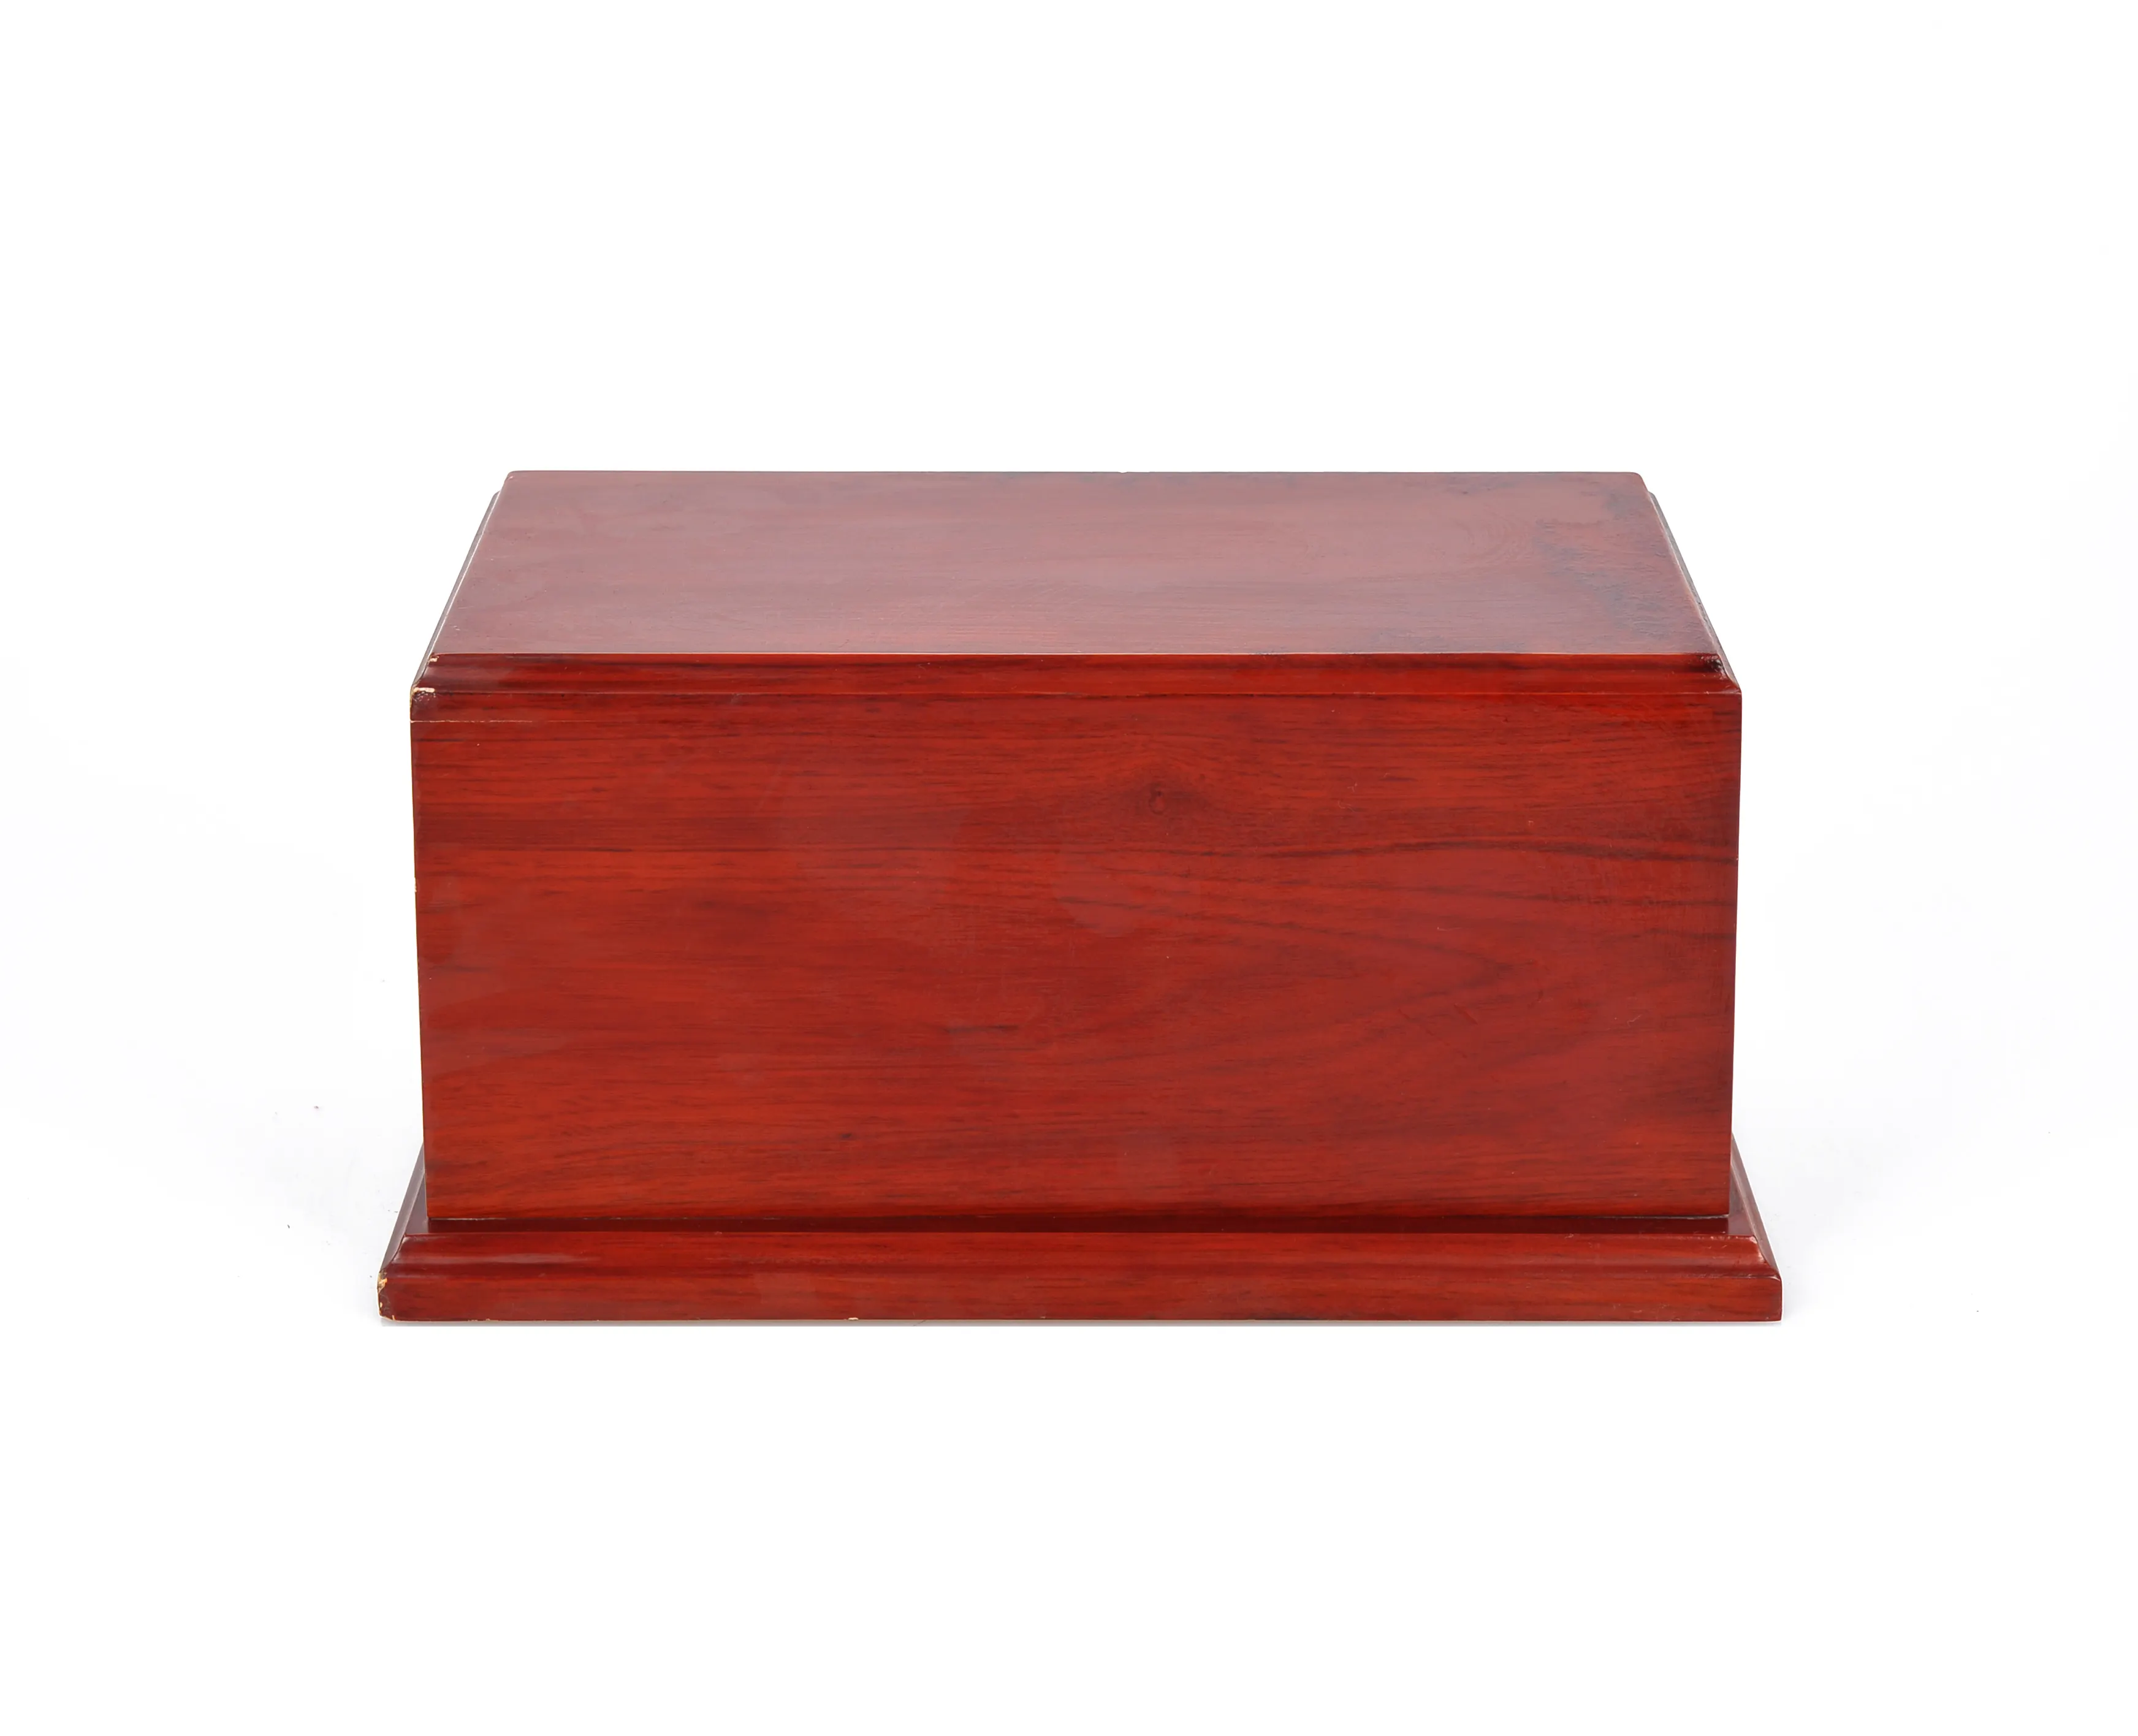 Makey funeral supplies human urn casket and coffins urns for ashes